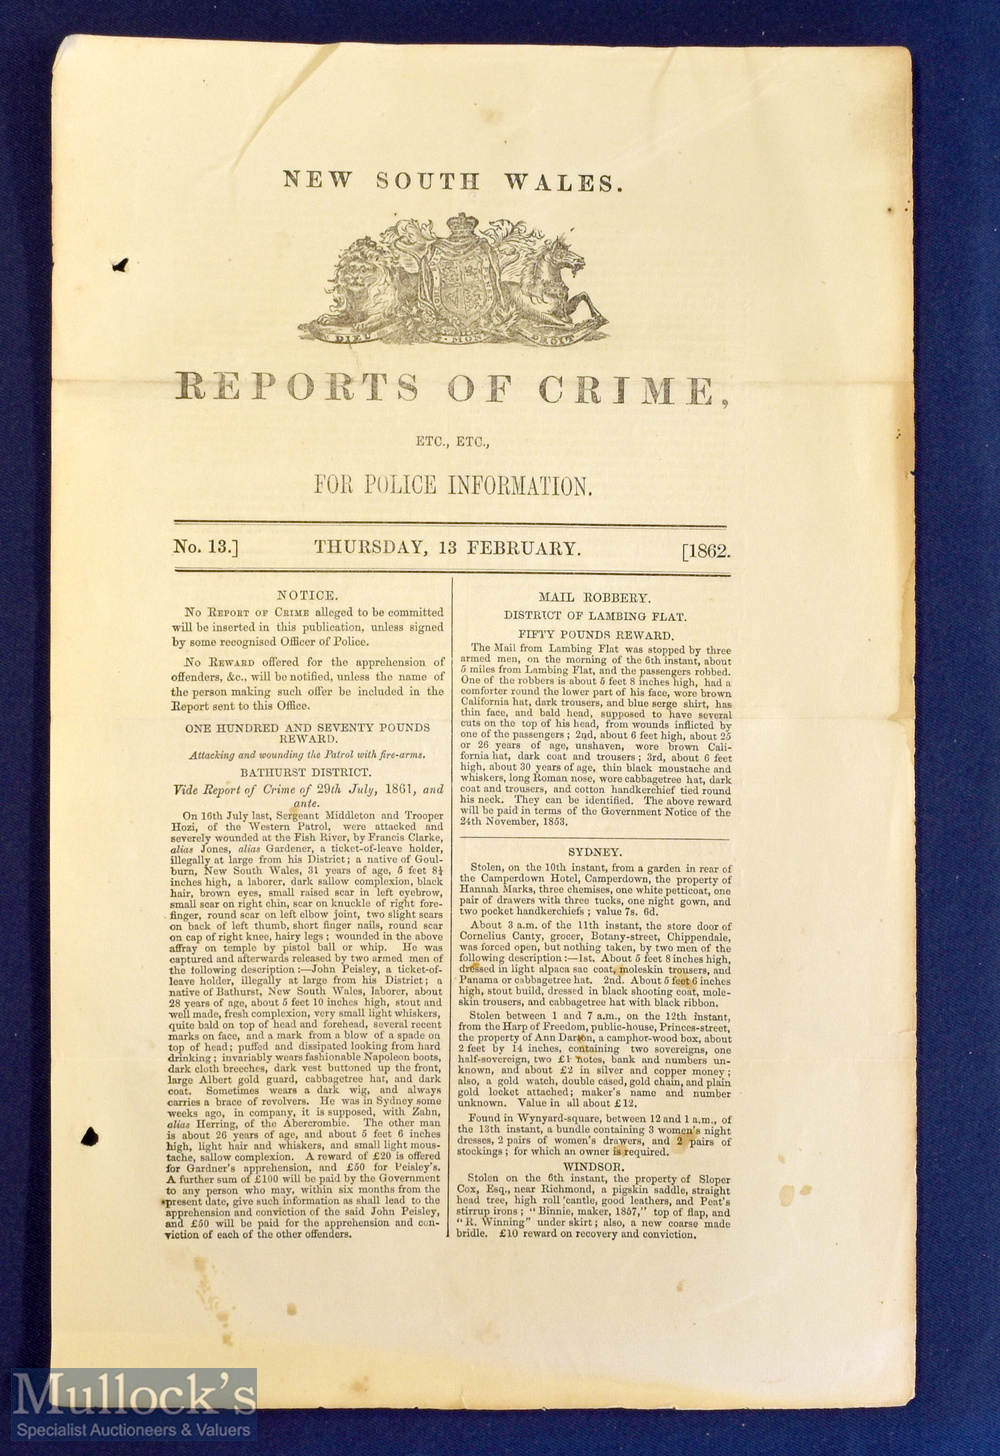 Australia - New South Wales - Reports Of Crime 13 February, 1862 complete edition of two pages / one